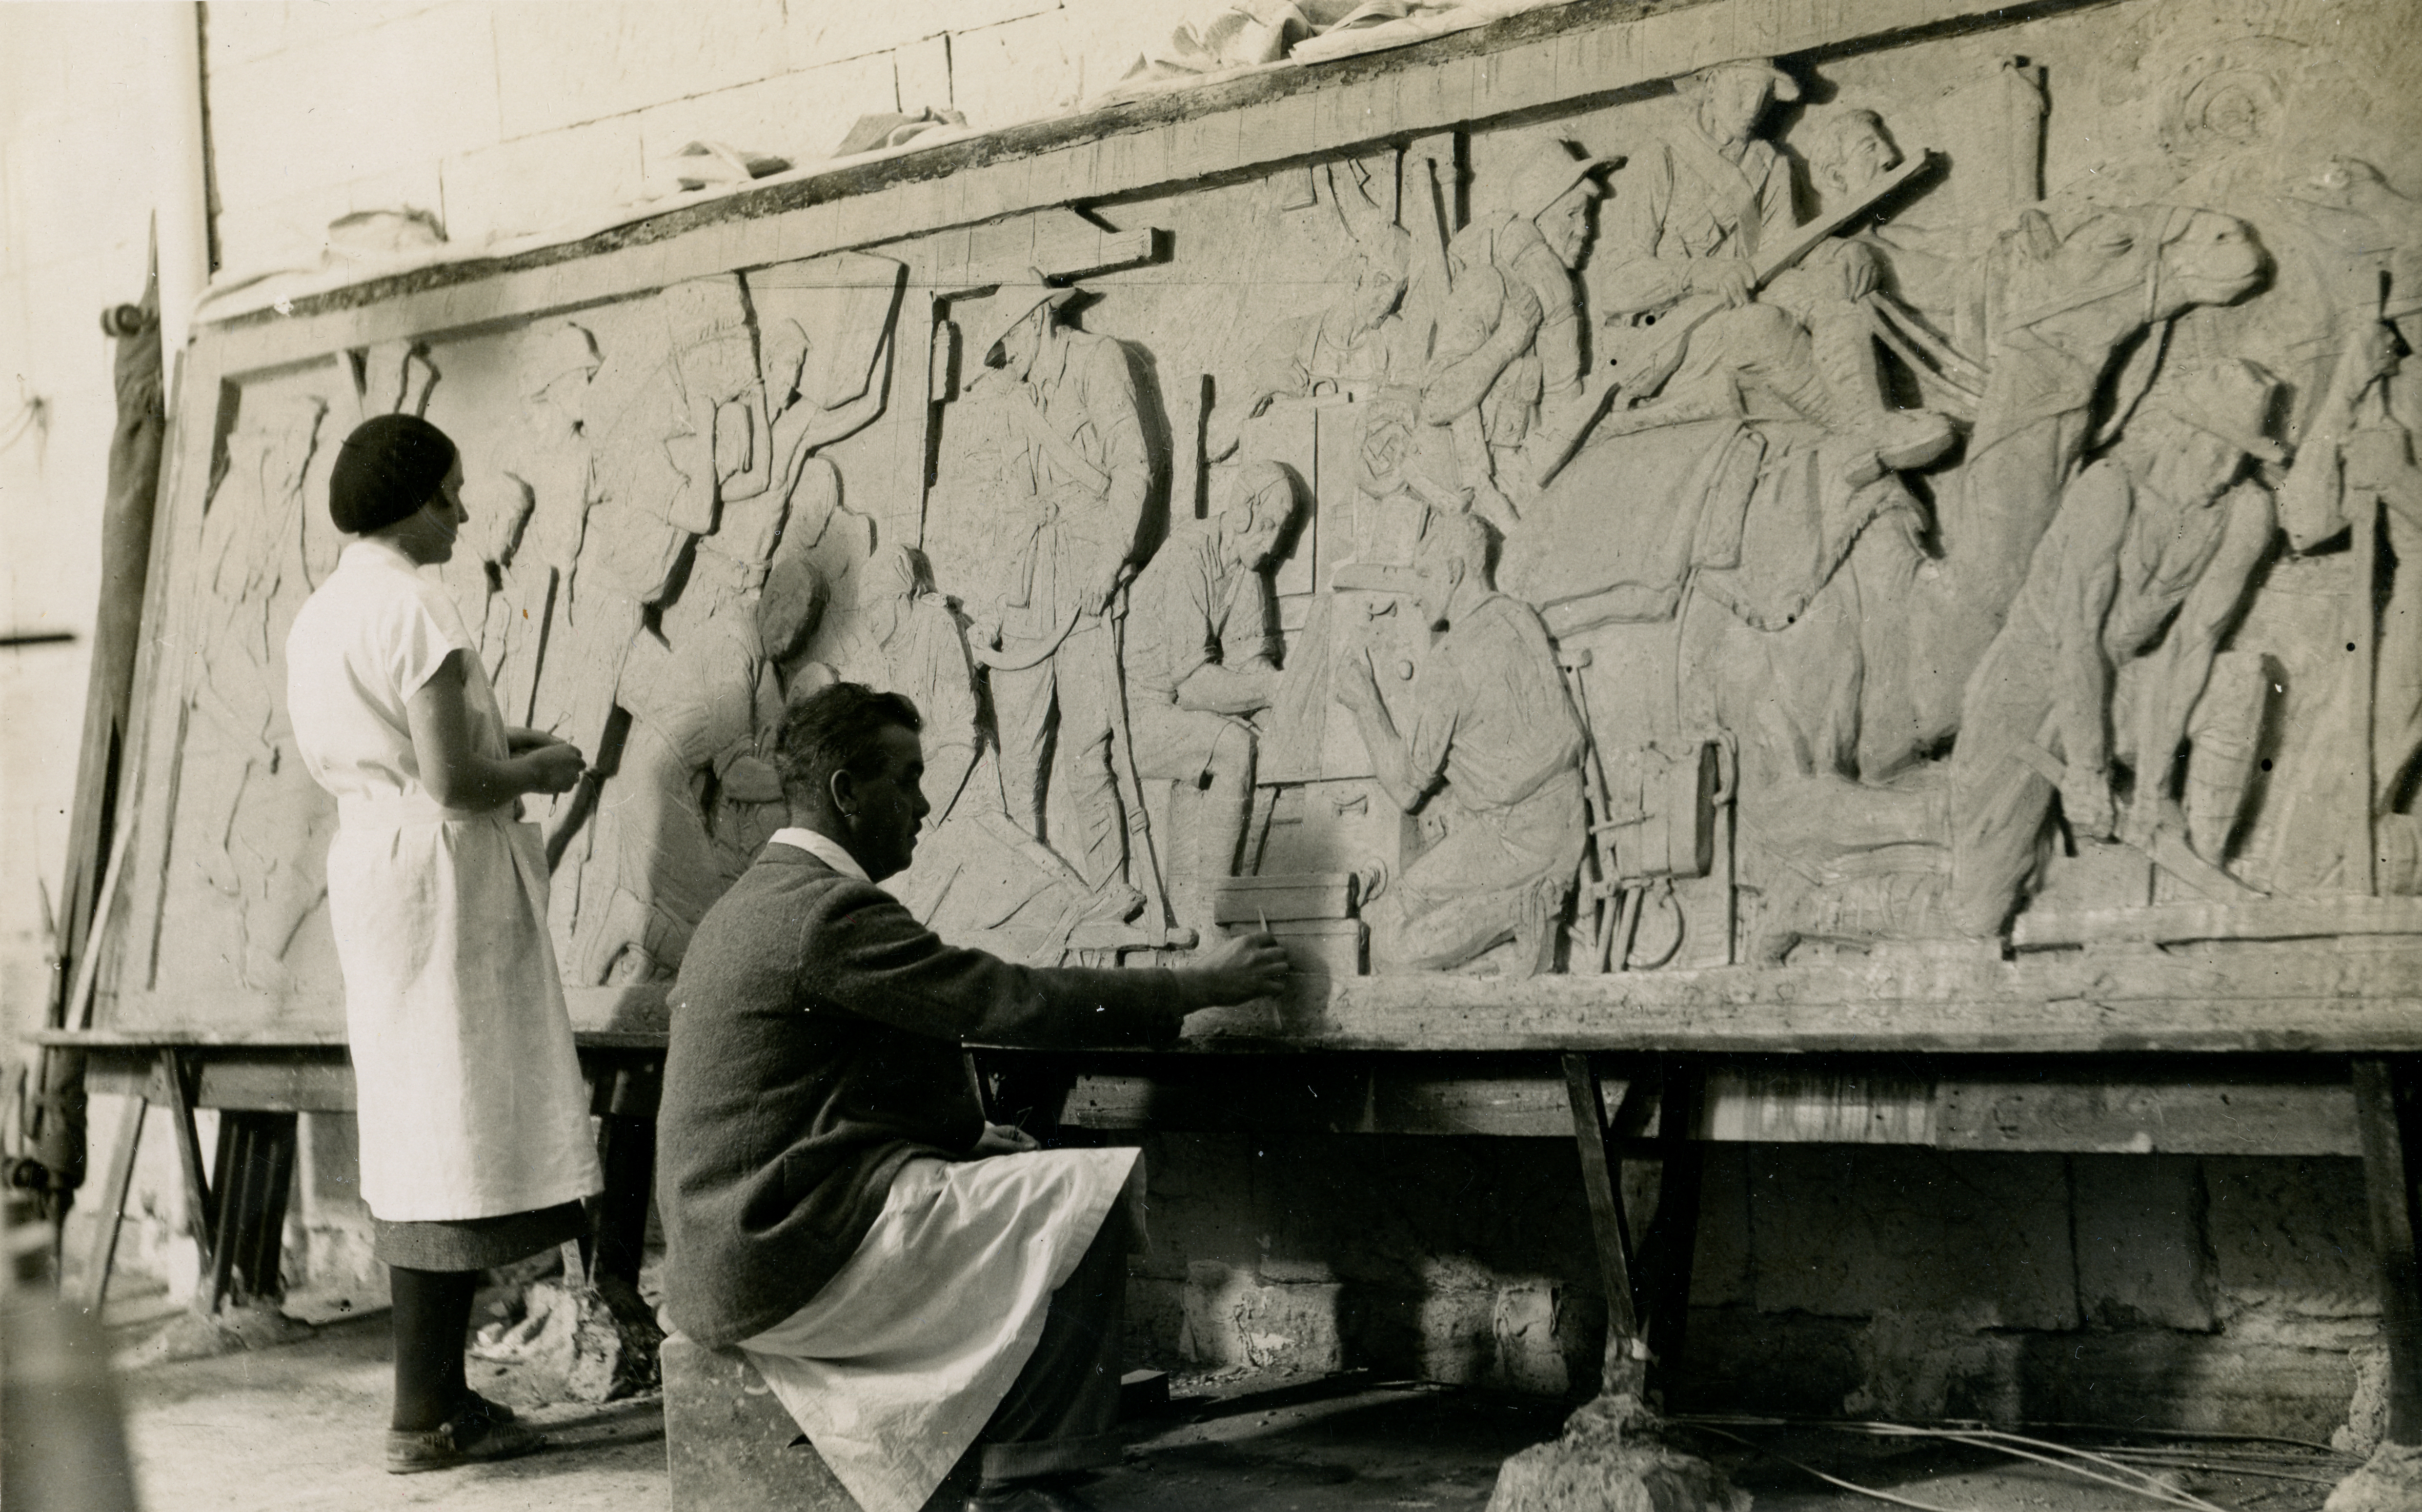 Eileen McGrath and Rayner Hoff working on a relief - courtesy Sylvia Embling archive